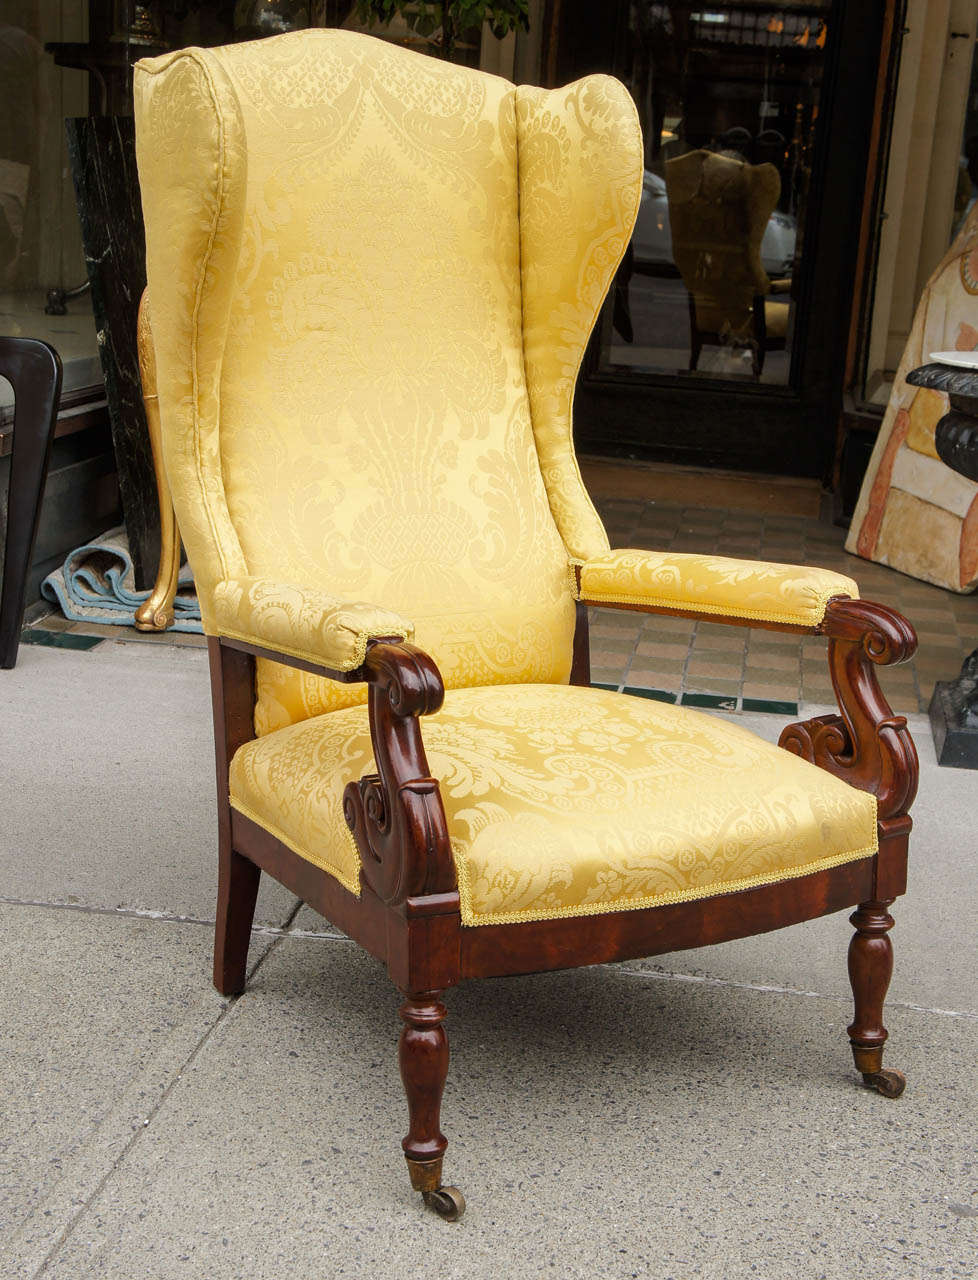 This chair showing fine classical styling was made in Boston circa 1820. Its style and shape relate to French Restoration design  and was practiced in this country by such designers as Thomas Voss, Honore Lannuier and Duncan Phyfe. The chair has a